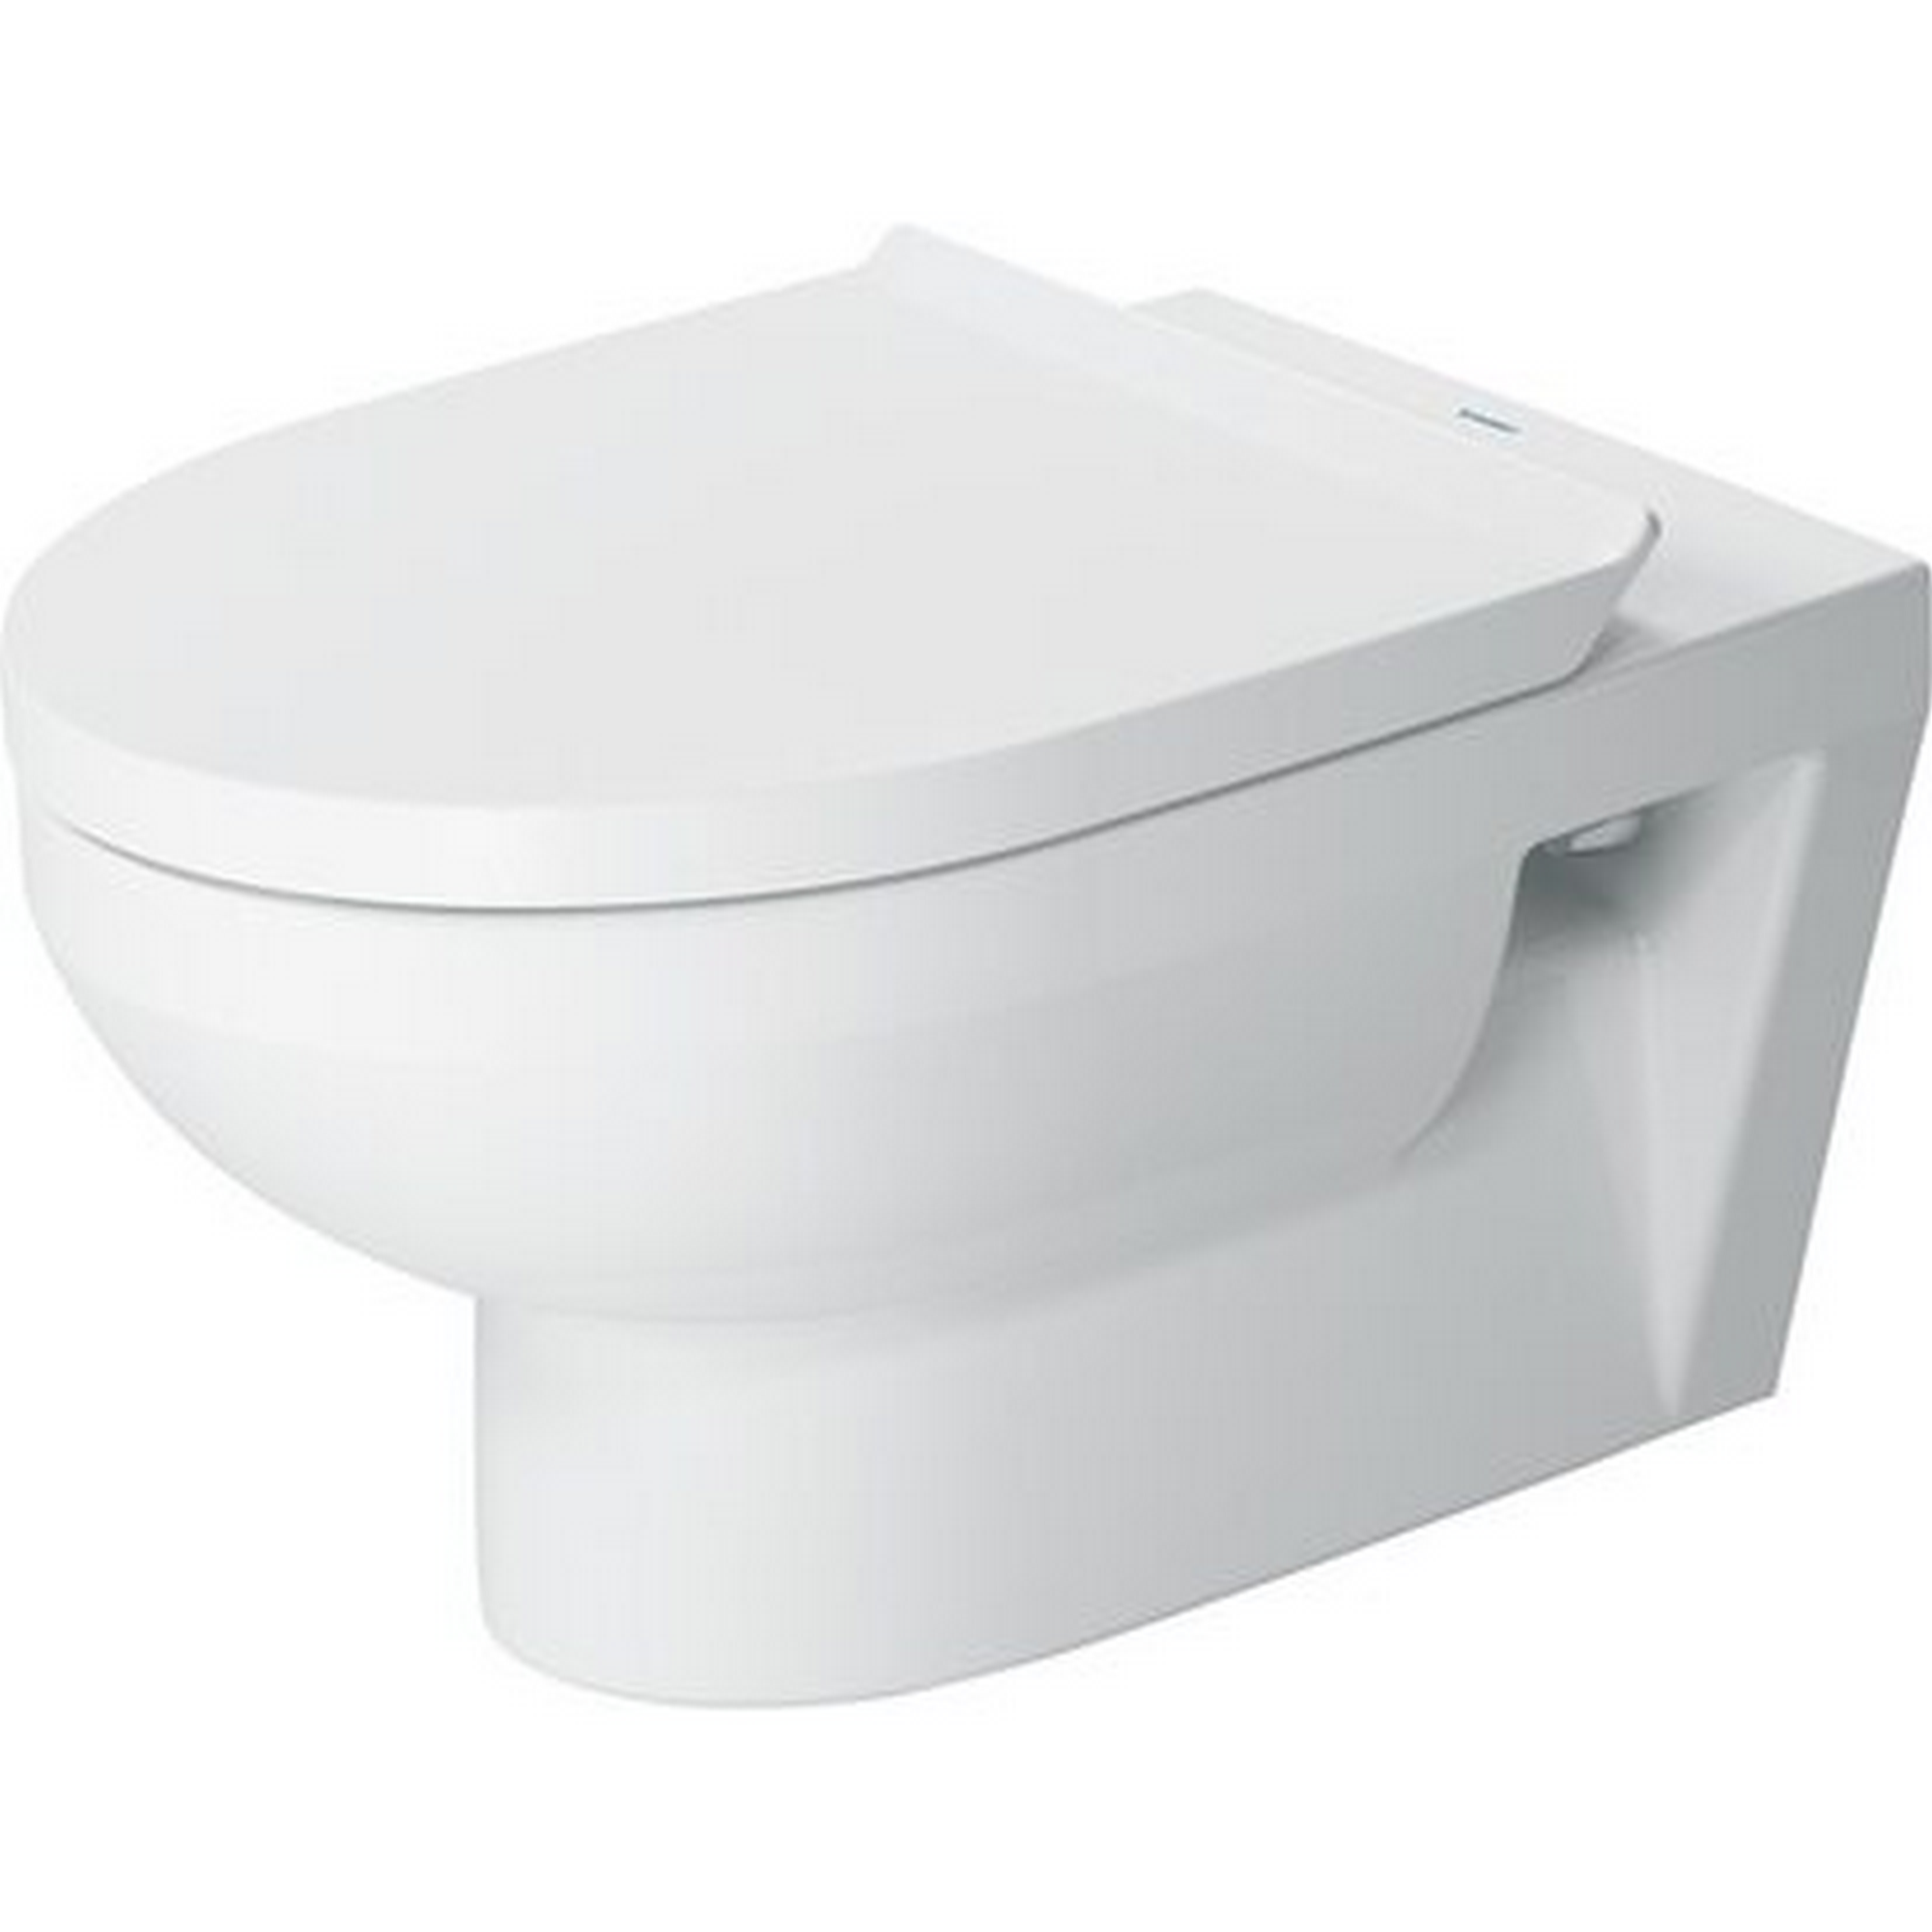 Wand-WC 'DuraStyle Basic' inklusive WC-Sitz 40 x 44 x 55 cm + product picture